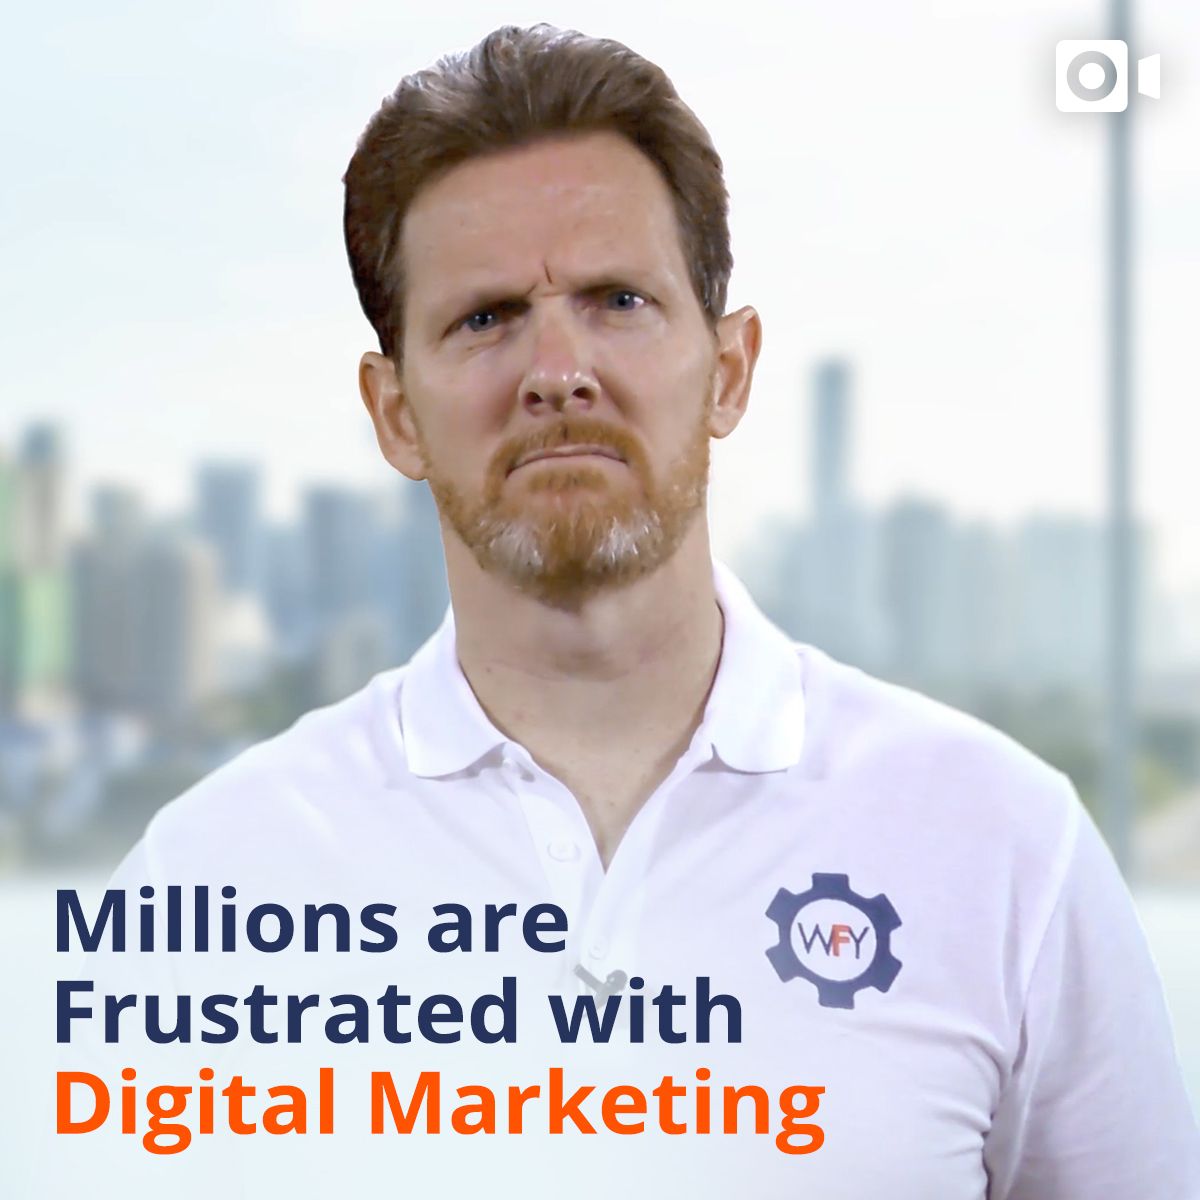 Millions are Frustrated with Digital Marketing